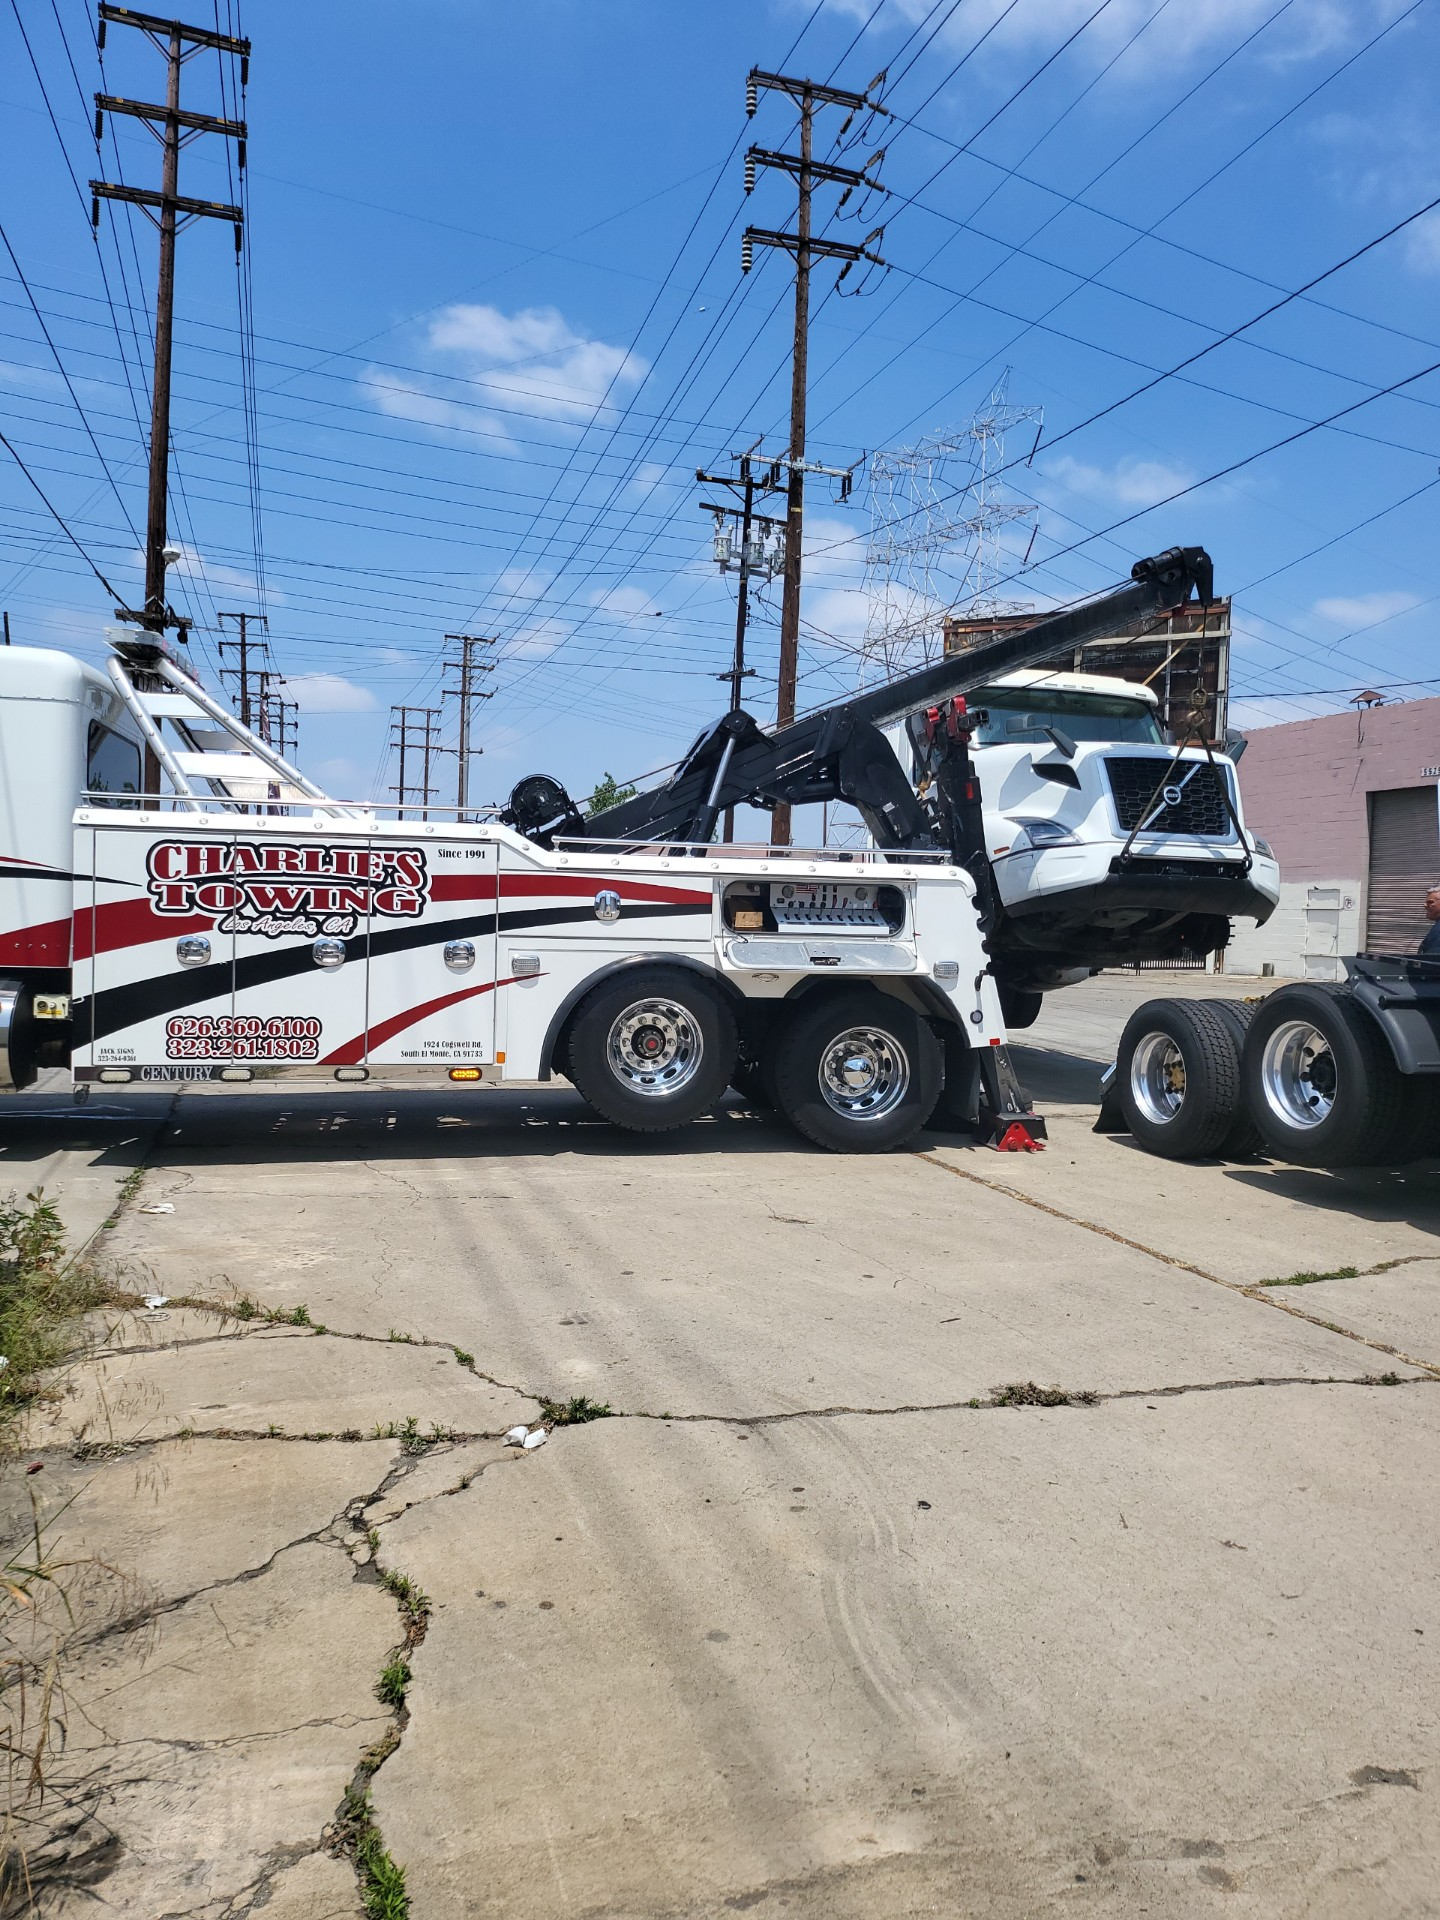 Charlie's 24hr Towing & Heavy Duty Los Angeles (323)261-1802